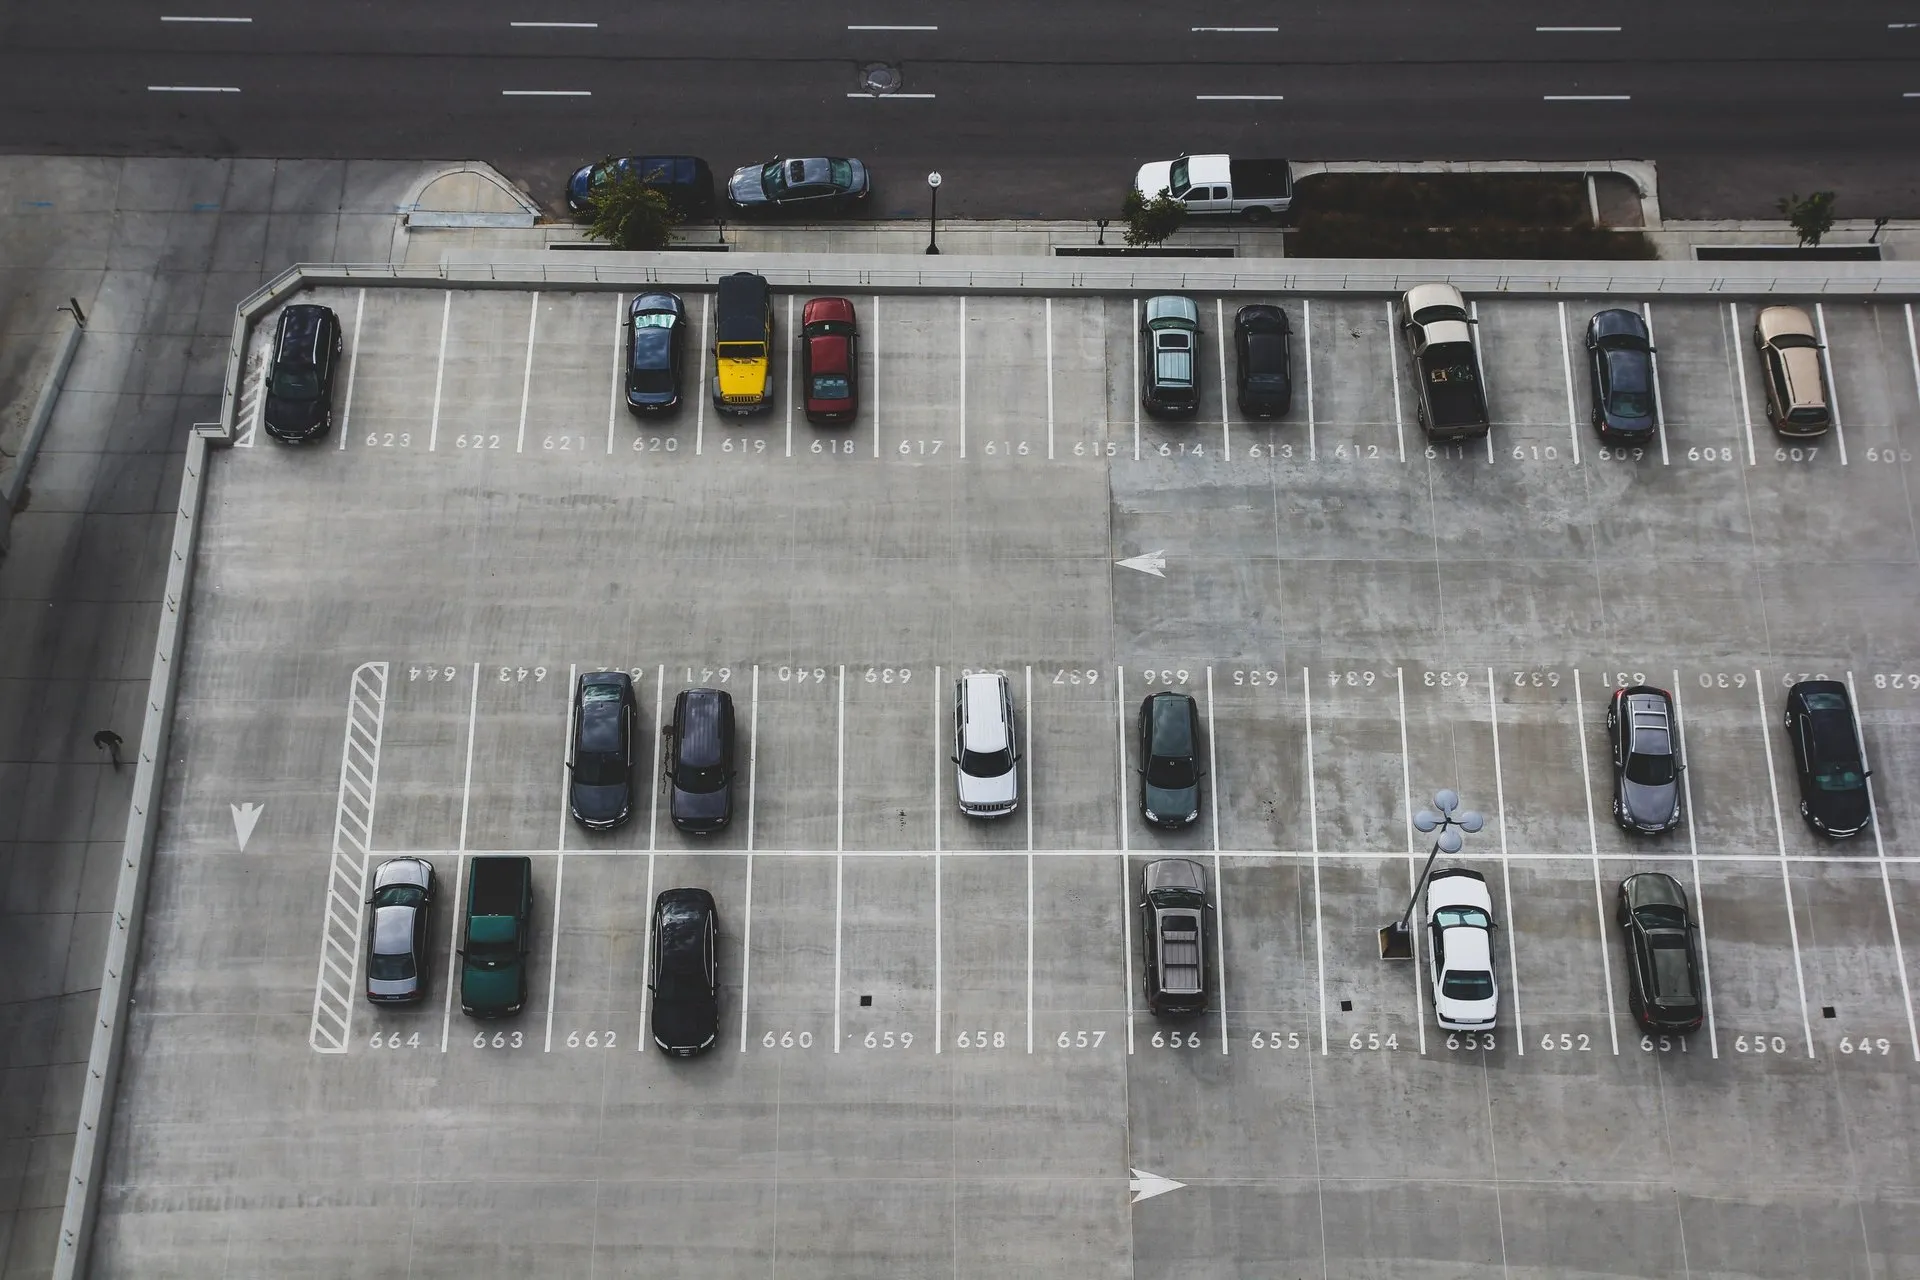 Need a Parking Structure that’s Built to Last? Try Our Design, Construction, and Maintenance Services of Parking Structures: